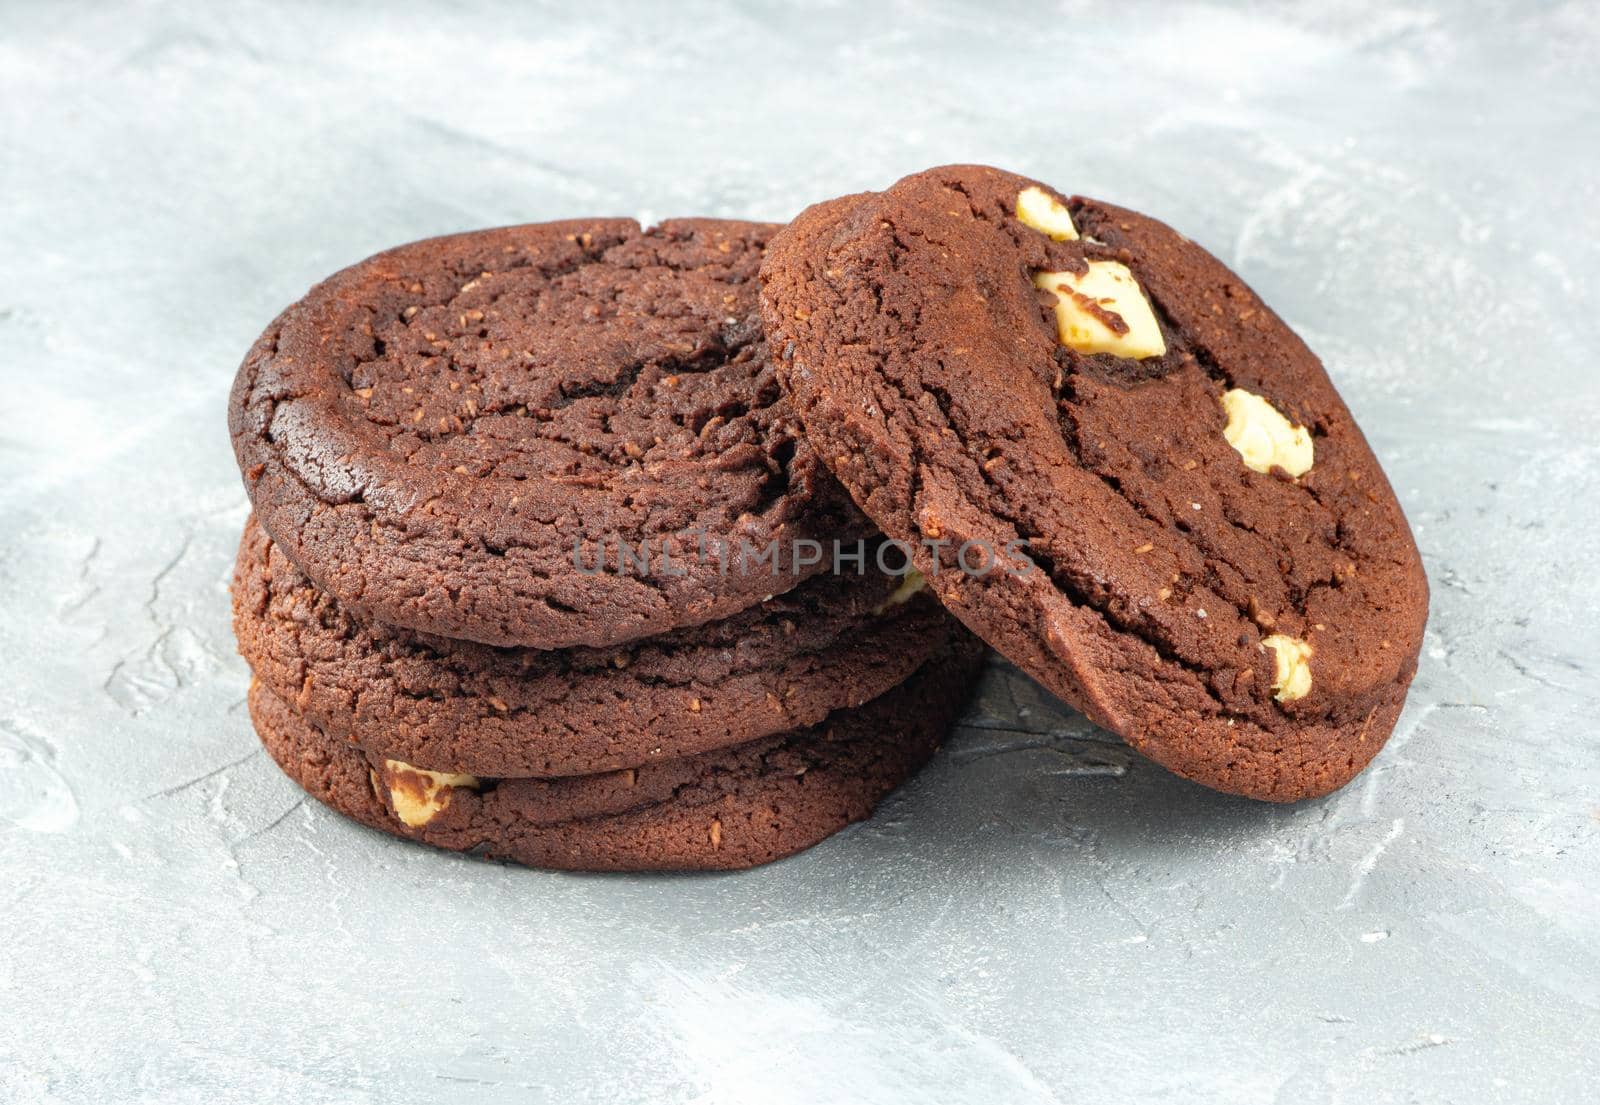 Homemade chocolate cookies with coconut on a concrete background